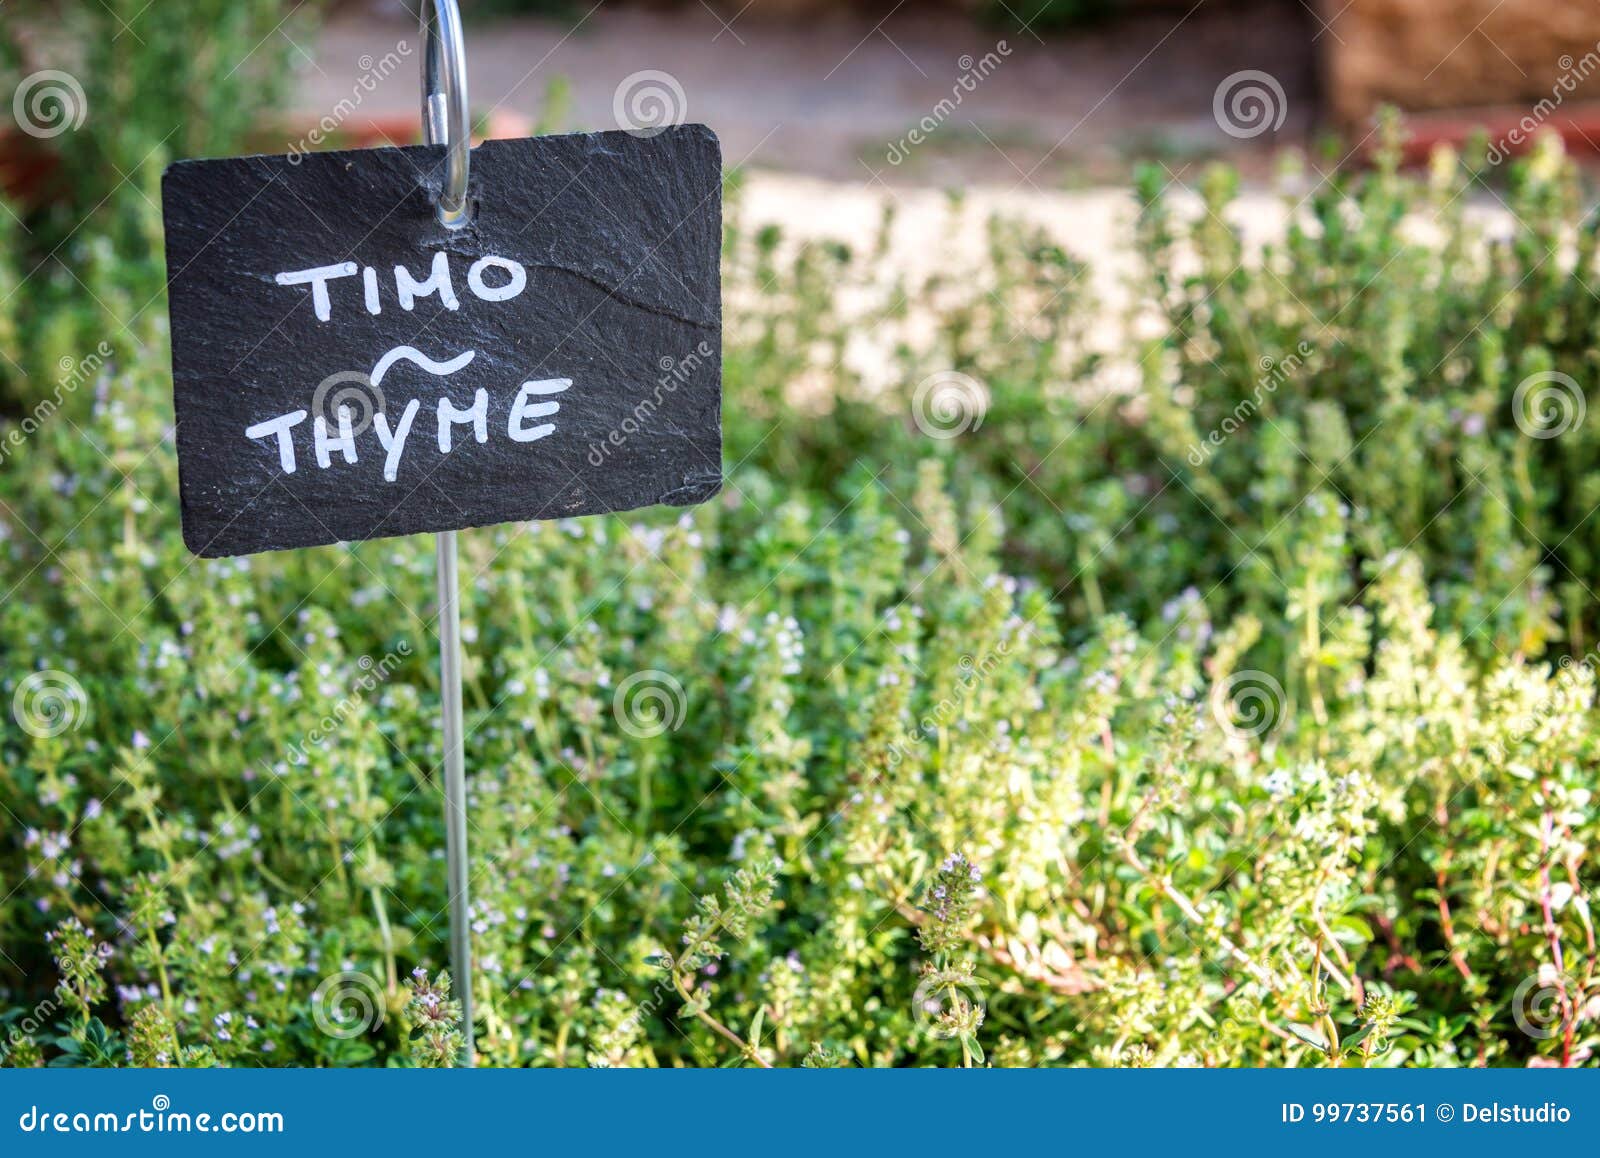 thyme growing in a garden, labelled in english and italian